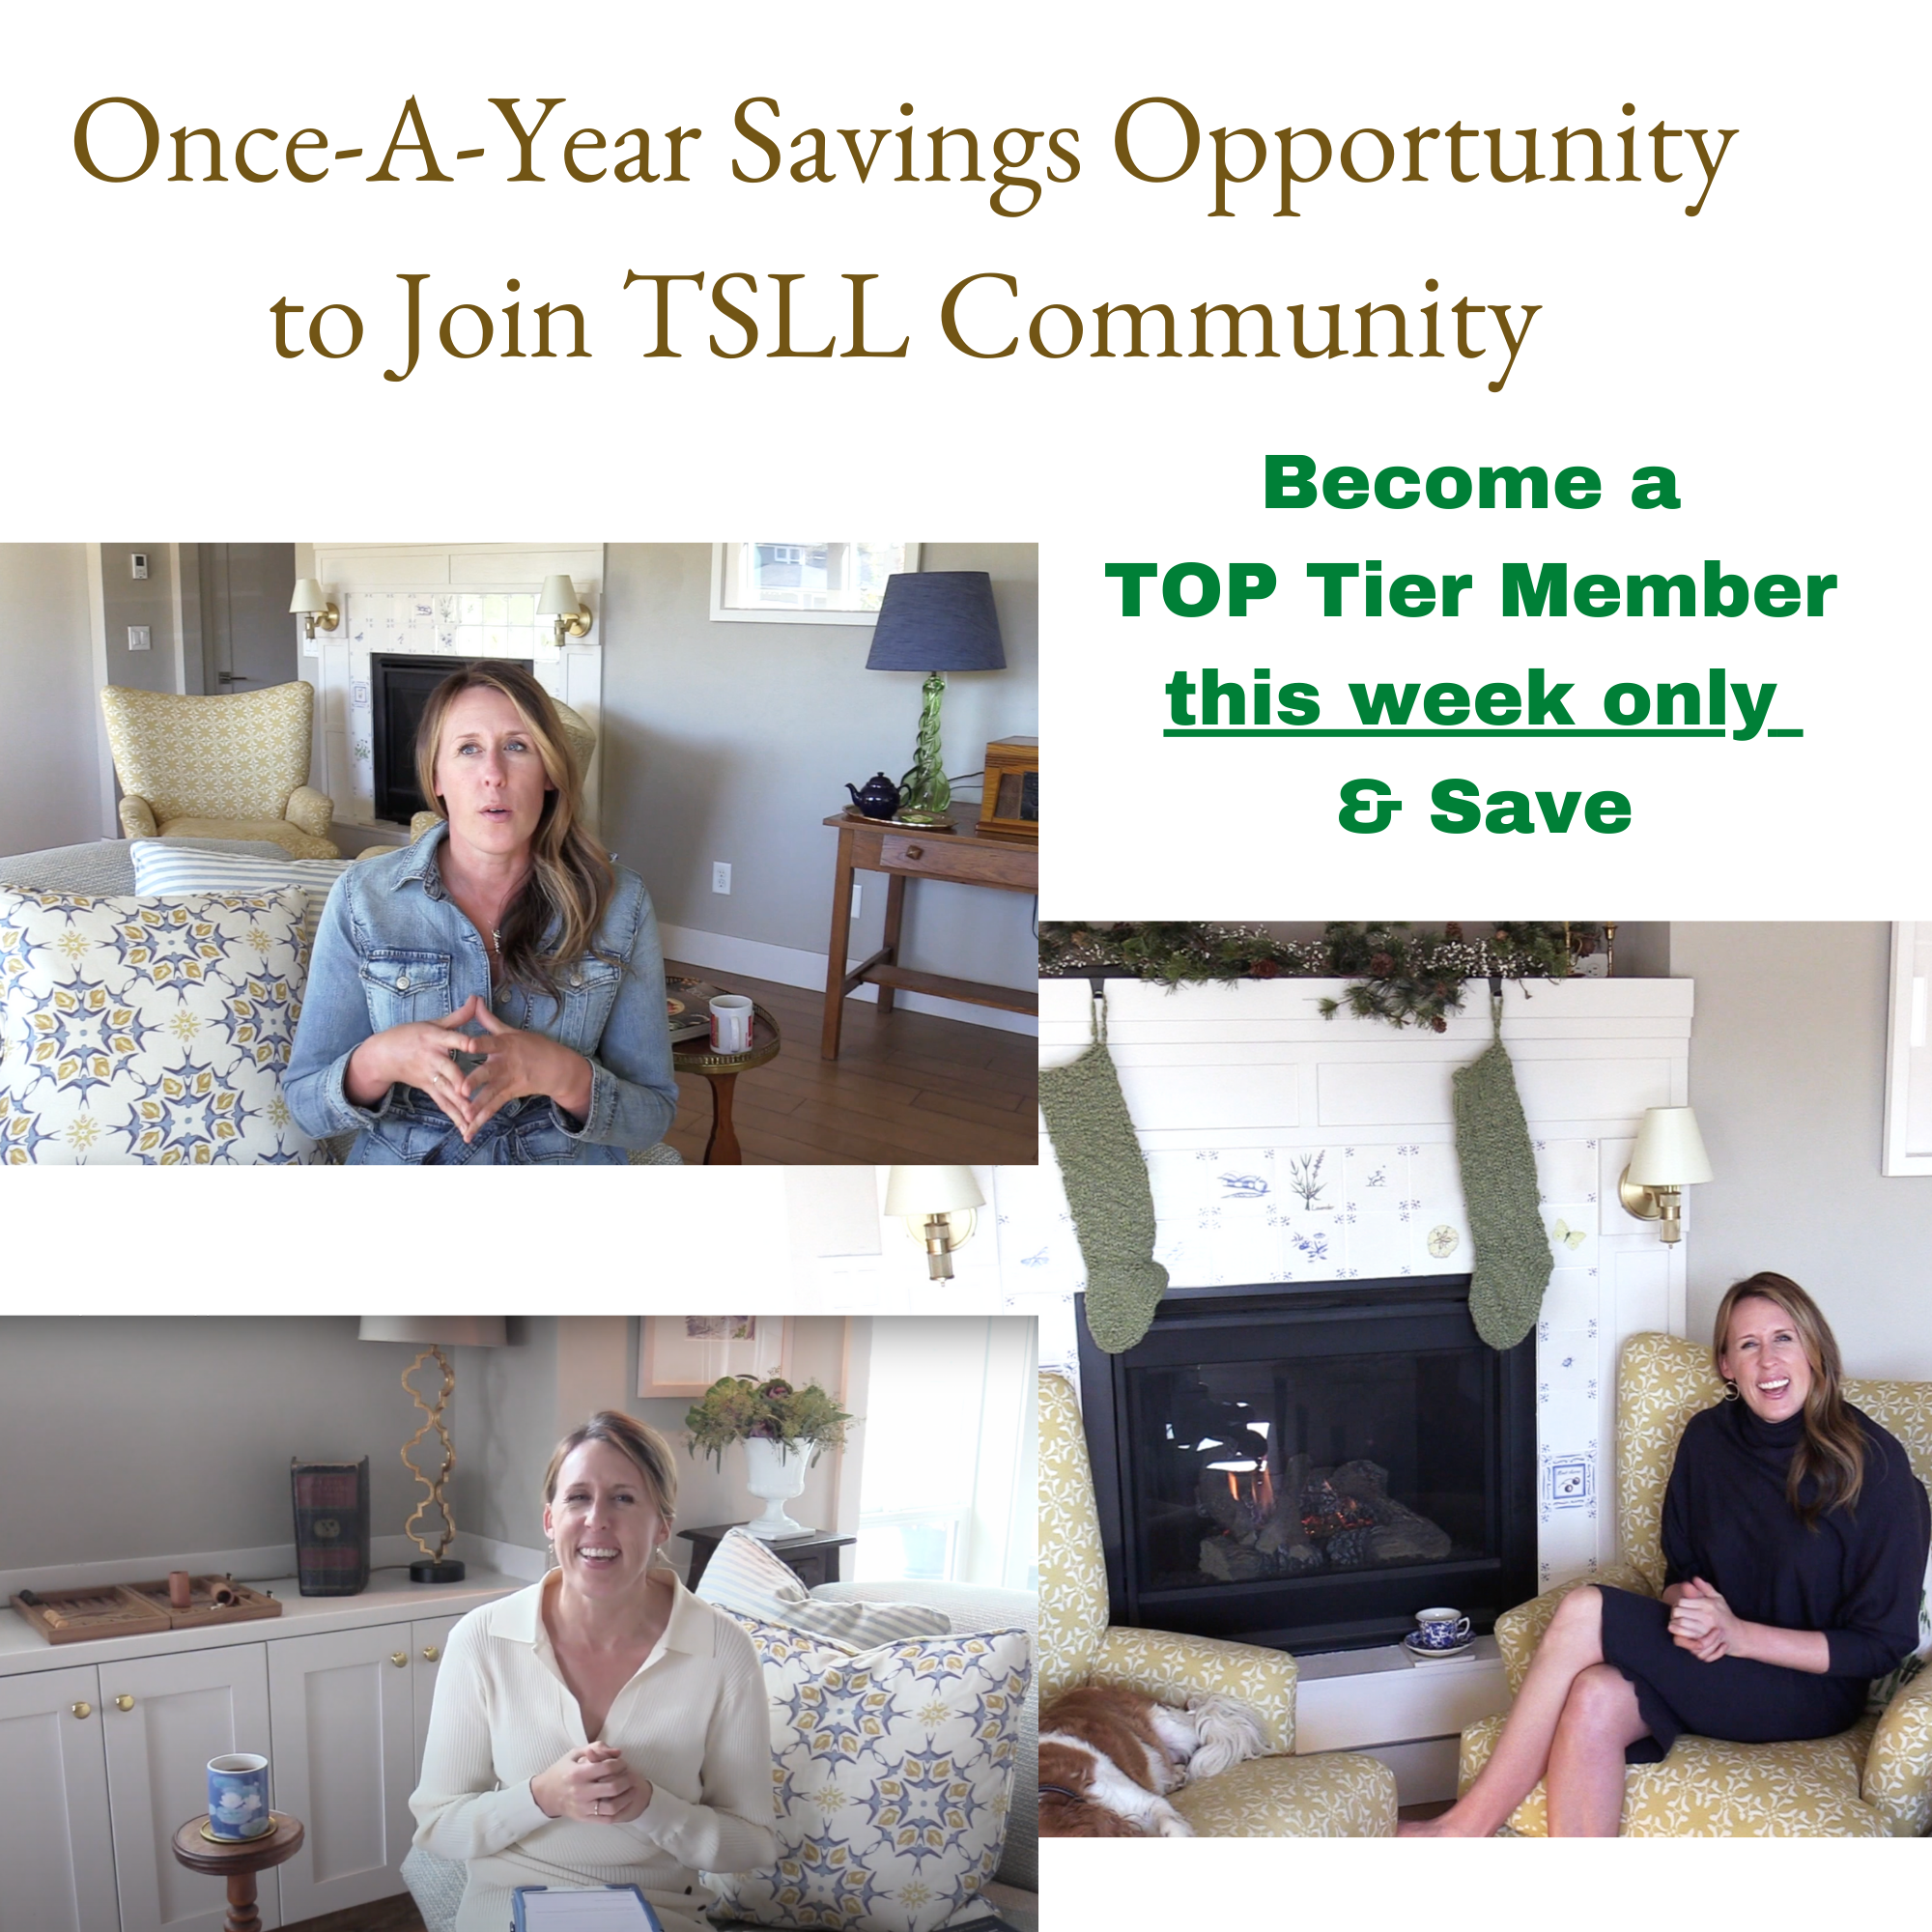 Become a TOP Tier Member: The Once-A-Year Opportunity to Save, this week only